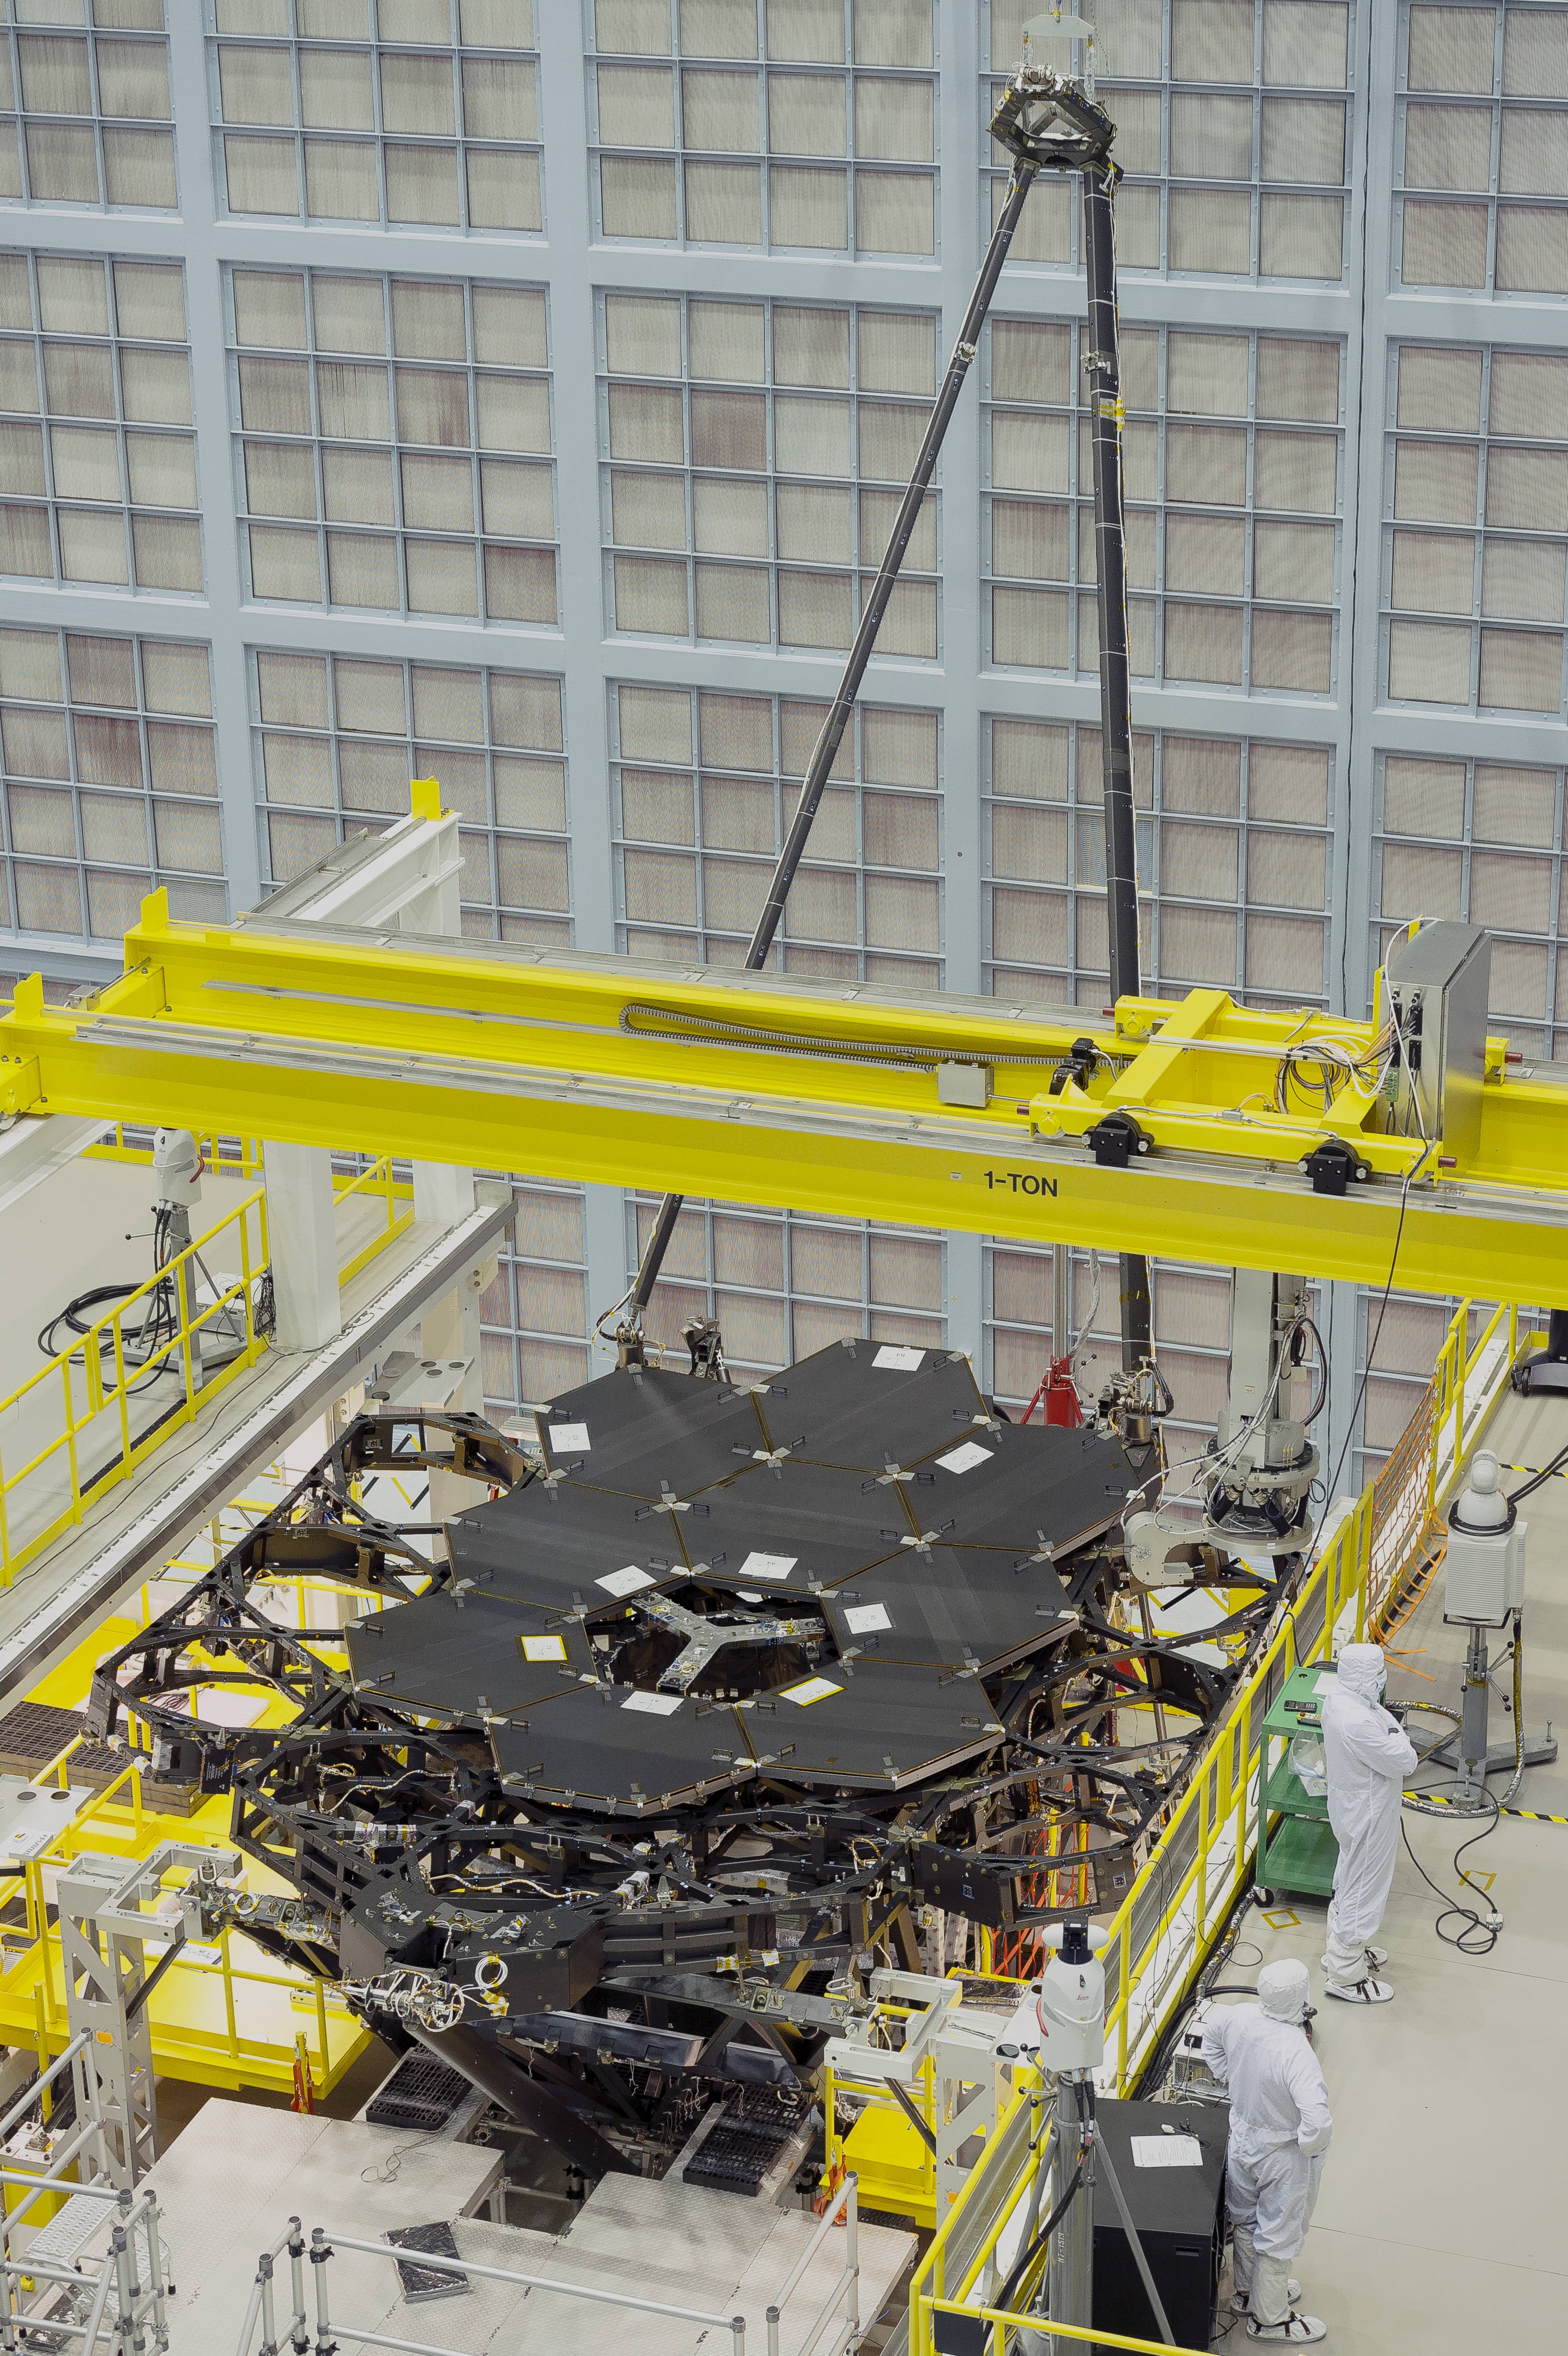 Nine of the James Webb Space Telescope's 18 primary flight mirrors have been installed on the telescope structure. This marks the halfway point in the James Webb Space Telescope's primary mirror installation.  Credits: NASA's Goddard Space Flight Center/Chris Gunn